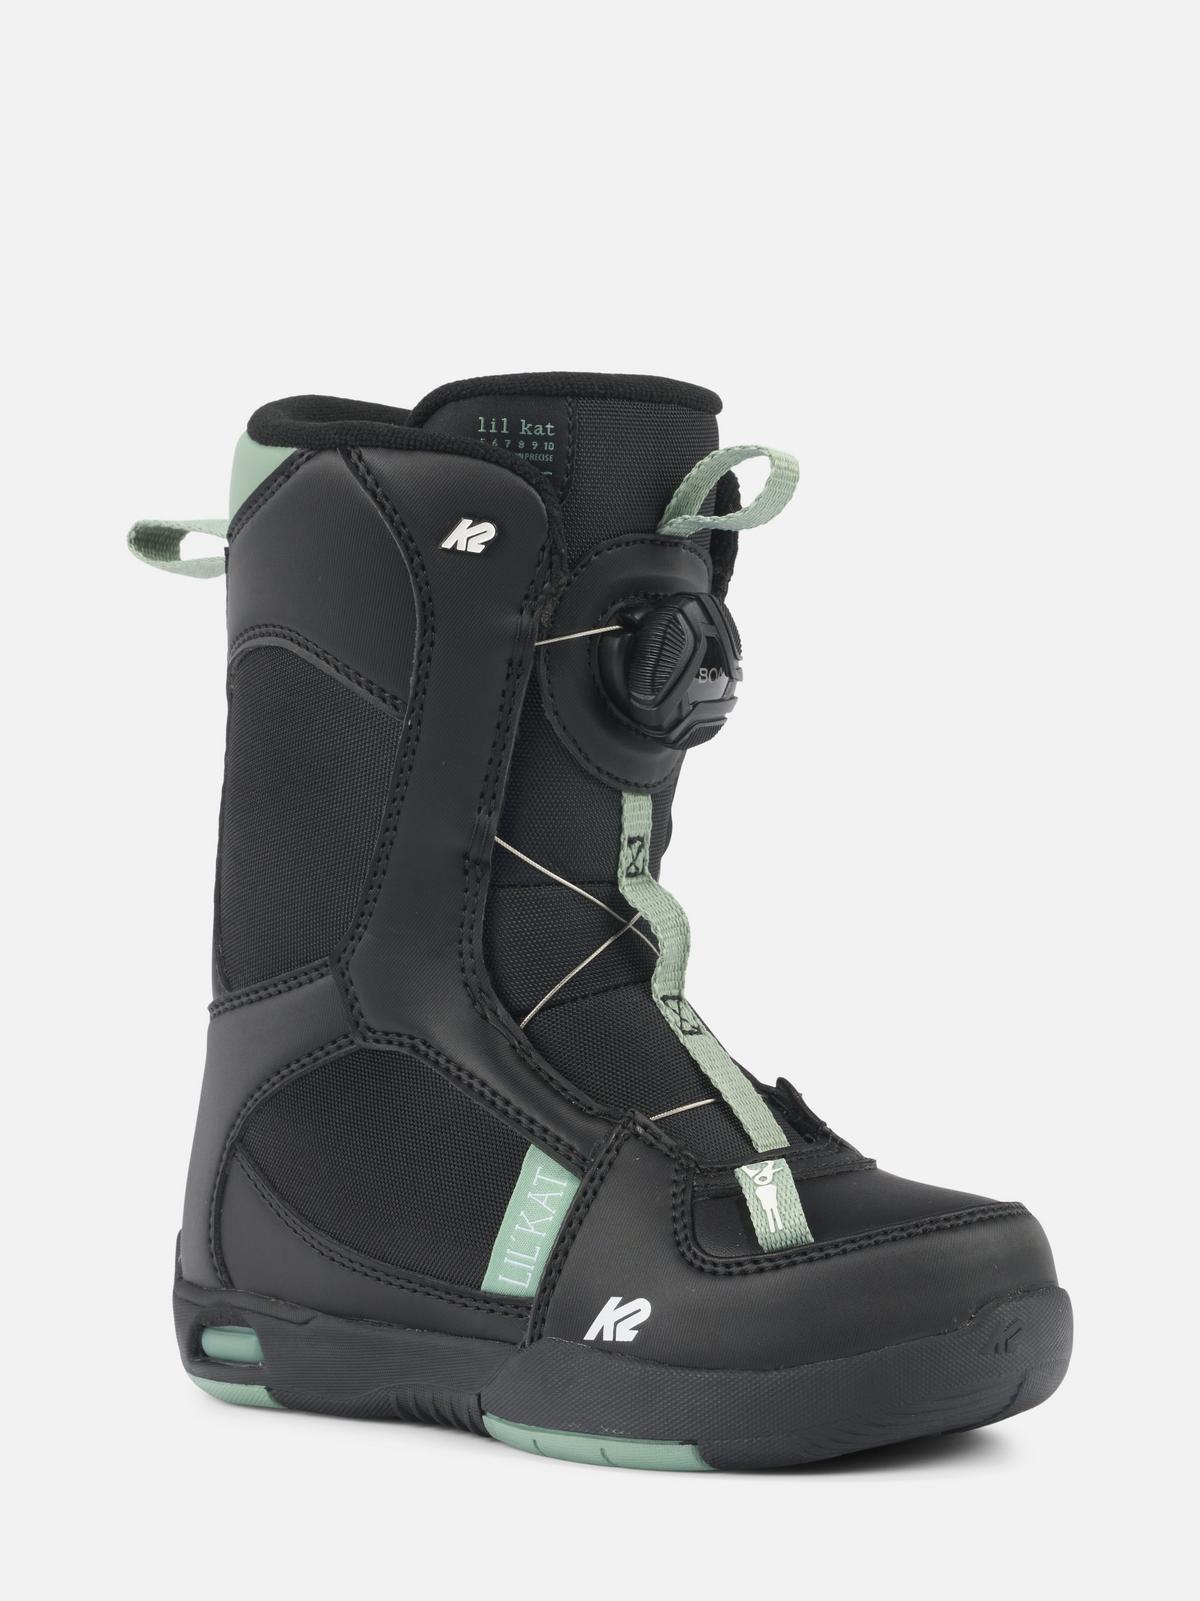 K2 Lil Kat Youth Snowboard Boots 2024 | K2 Skis and K2 Snowboarding